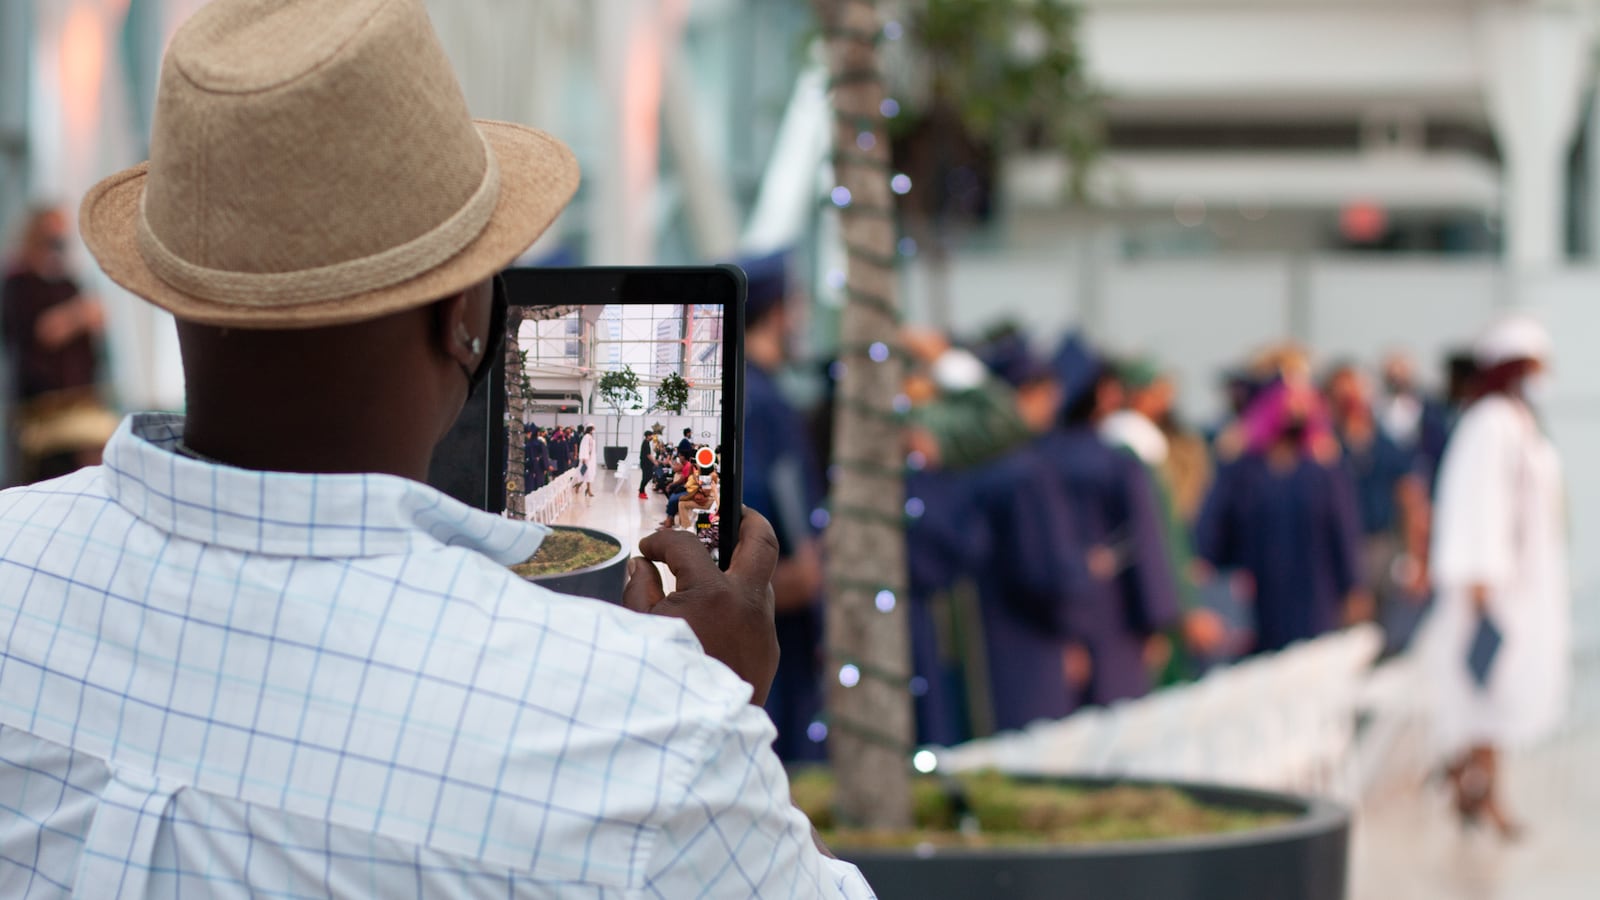 A parent wearing a straw hat and light checkered shirt uses an iPad to document graduation.